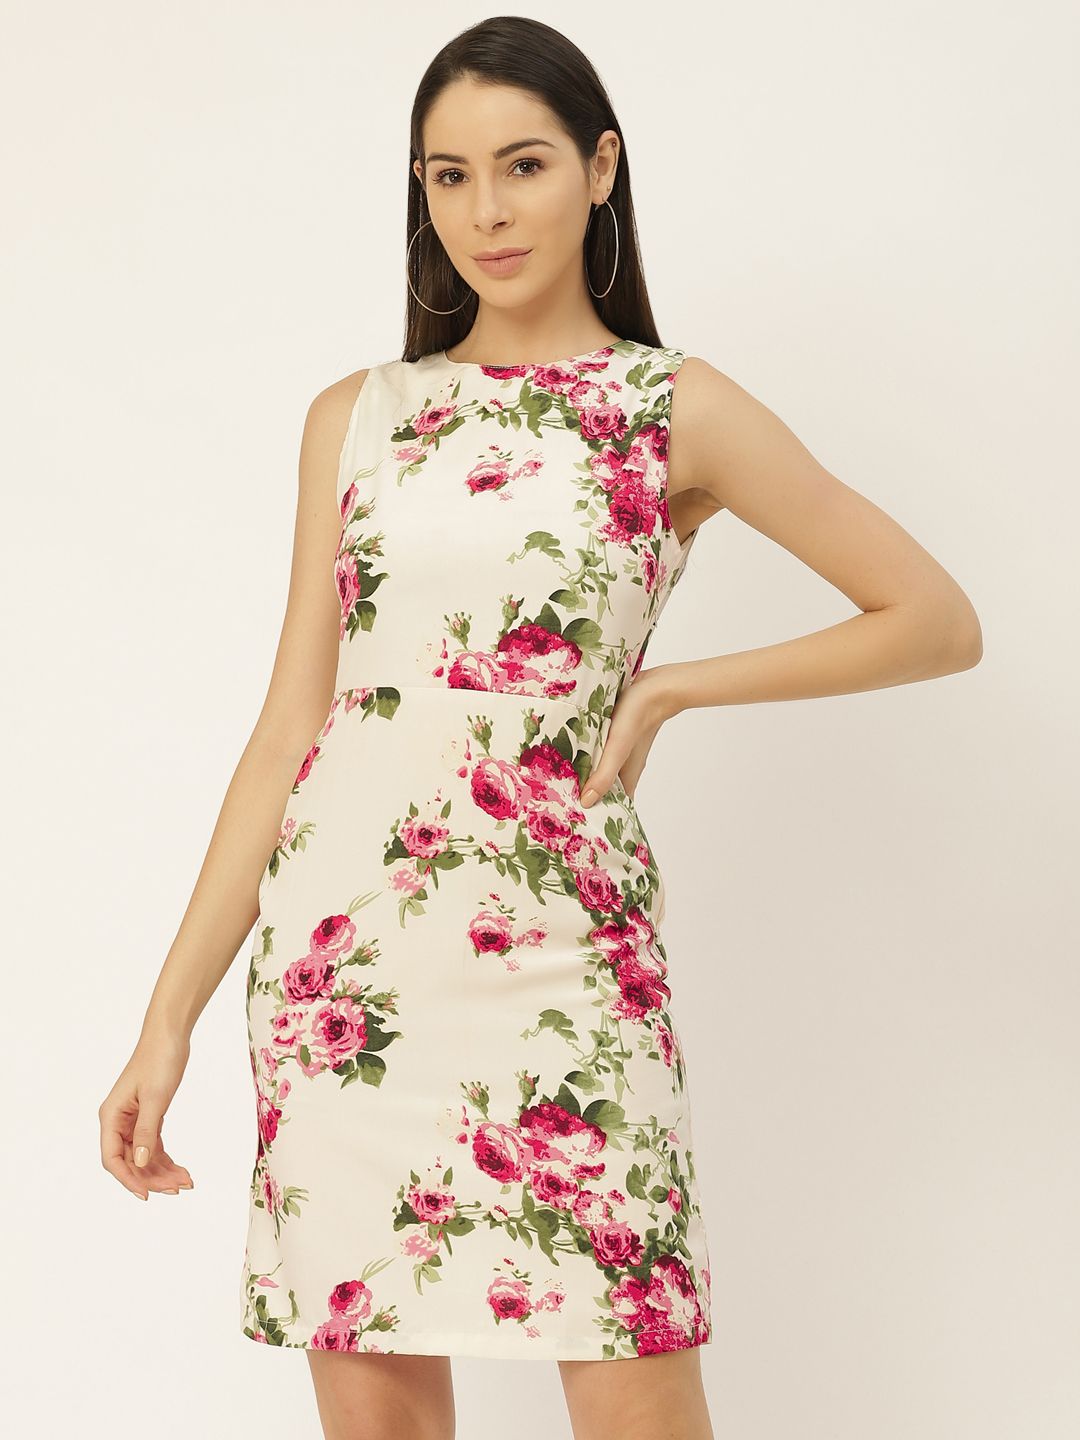 Belle Fille Women Off-White & Pink Floral Print Sheath Dress Price in India